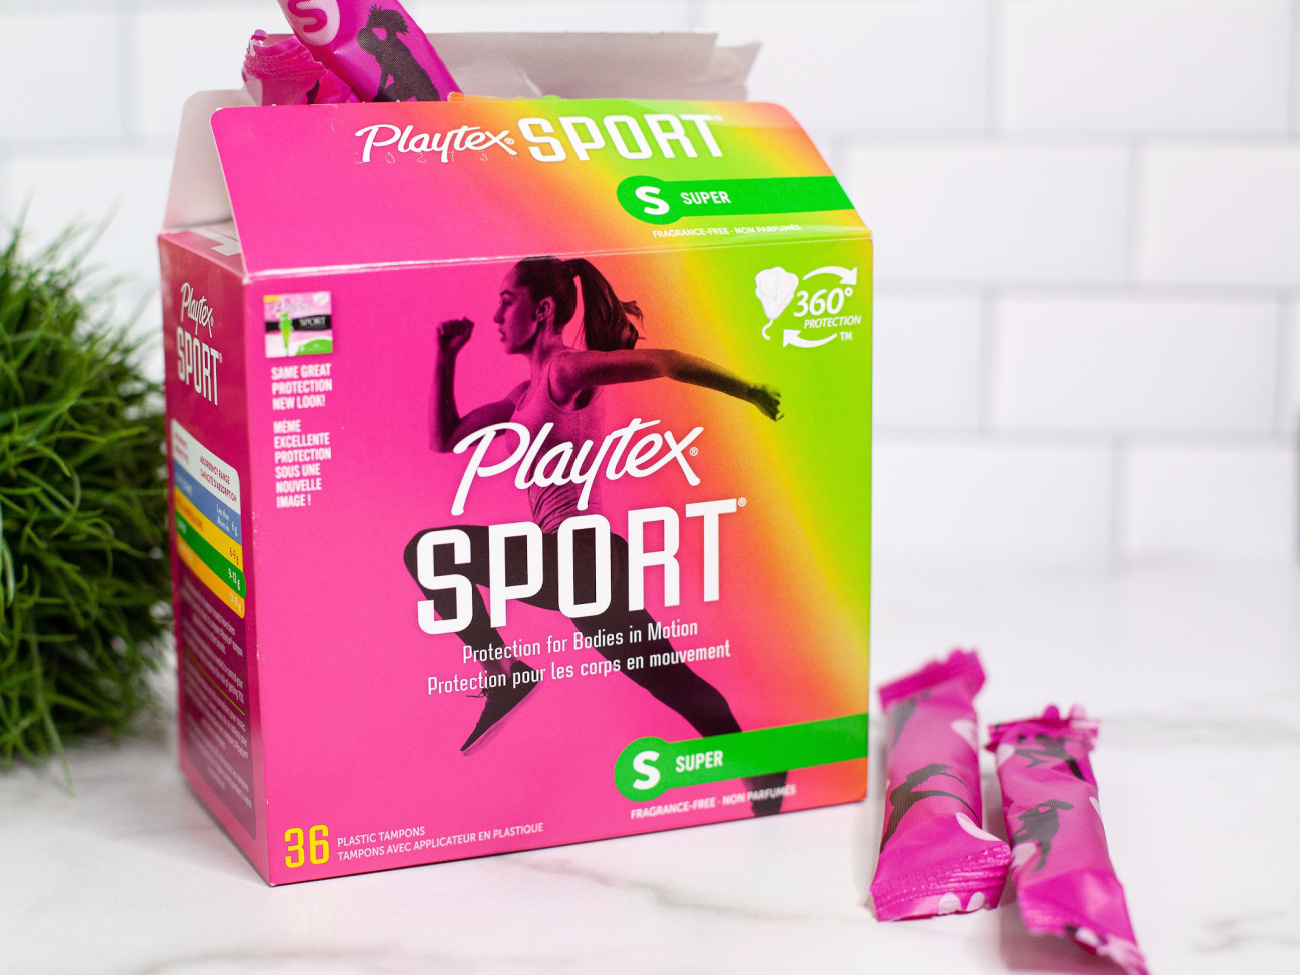 Playtex Sport Tampons Coupon To Print – Save $4 - iHeartPublix